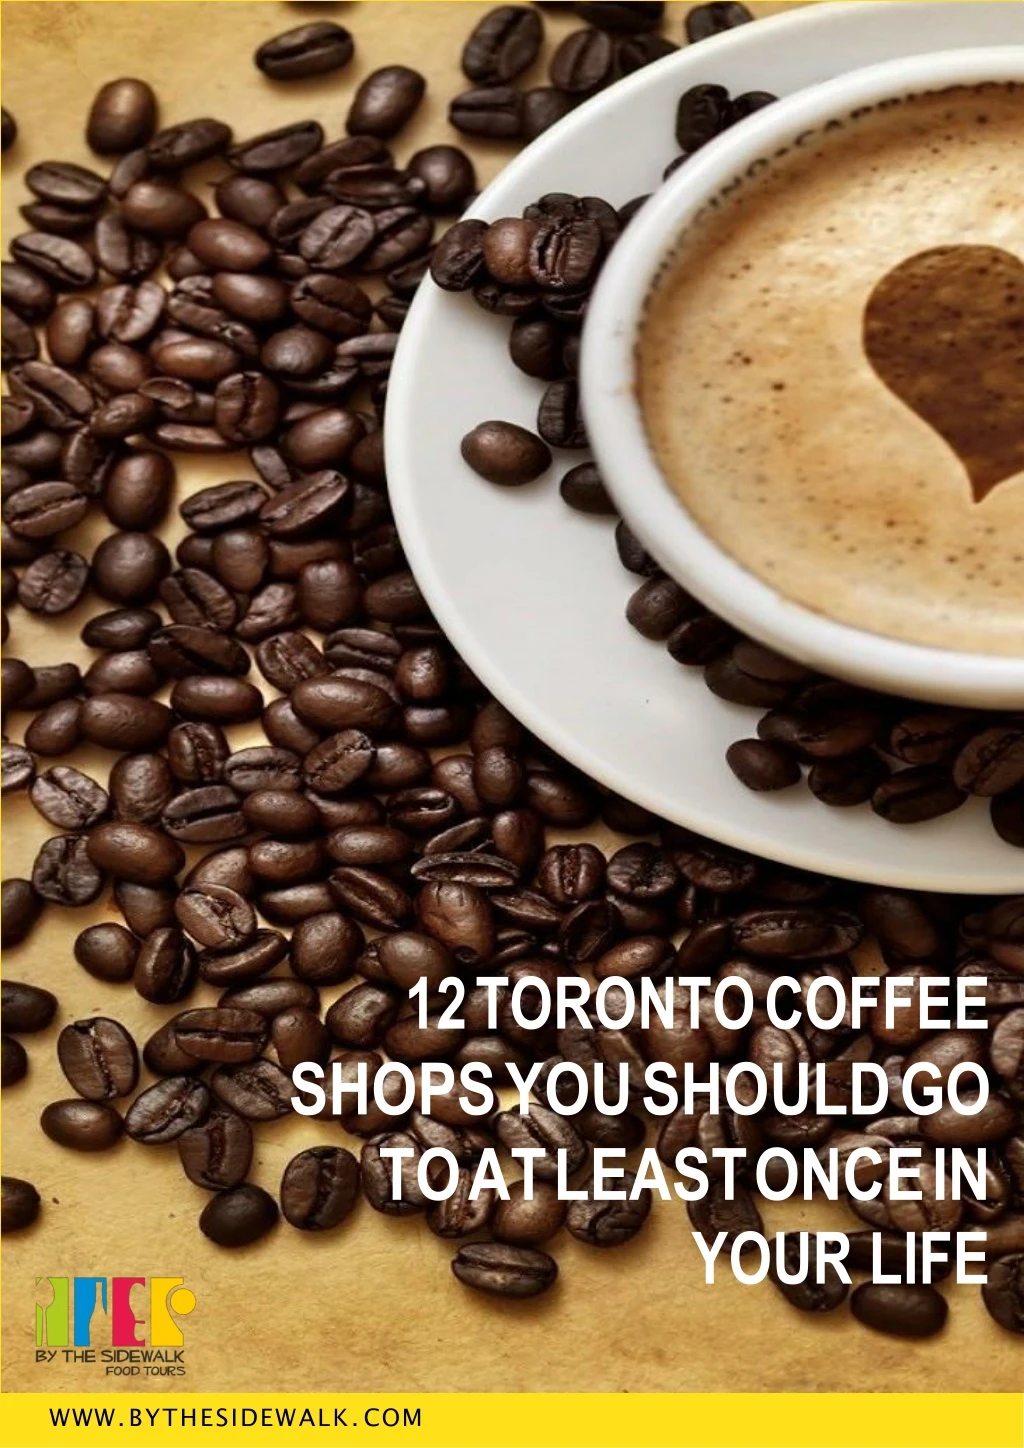 12 toronto coffee shops you should go to at least